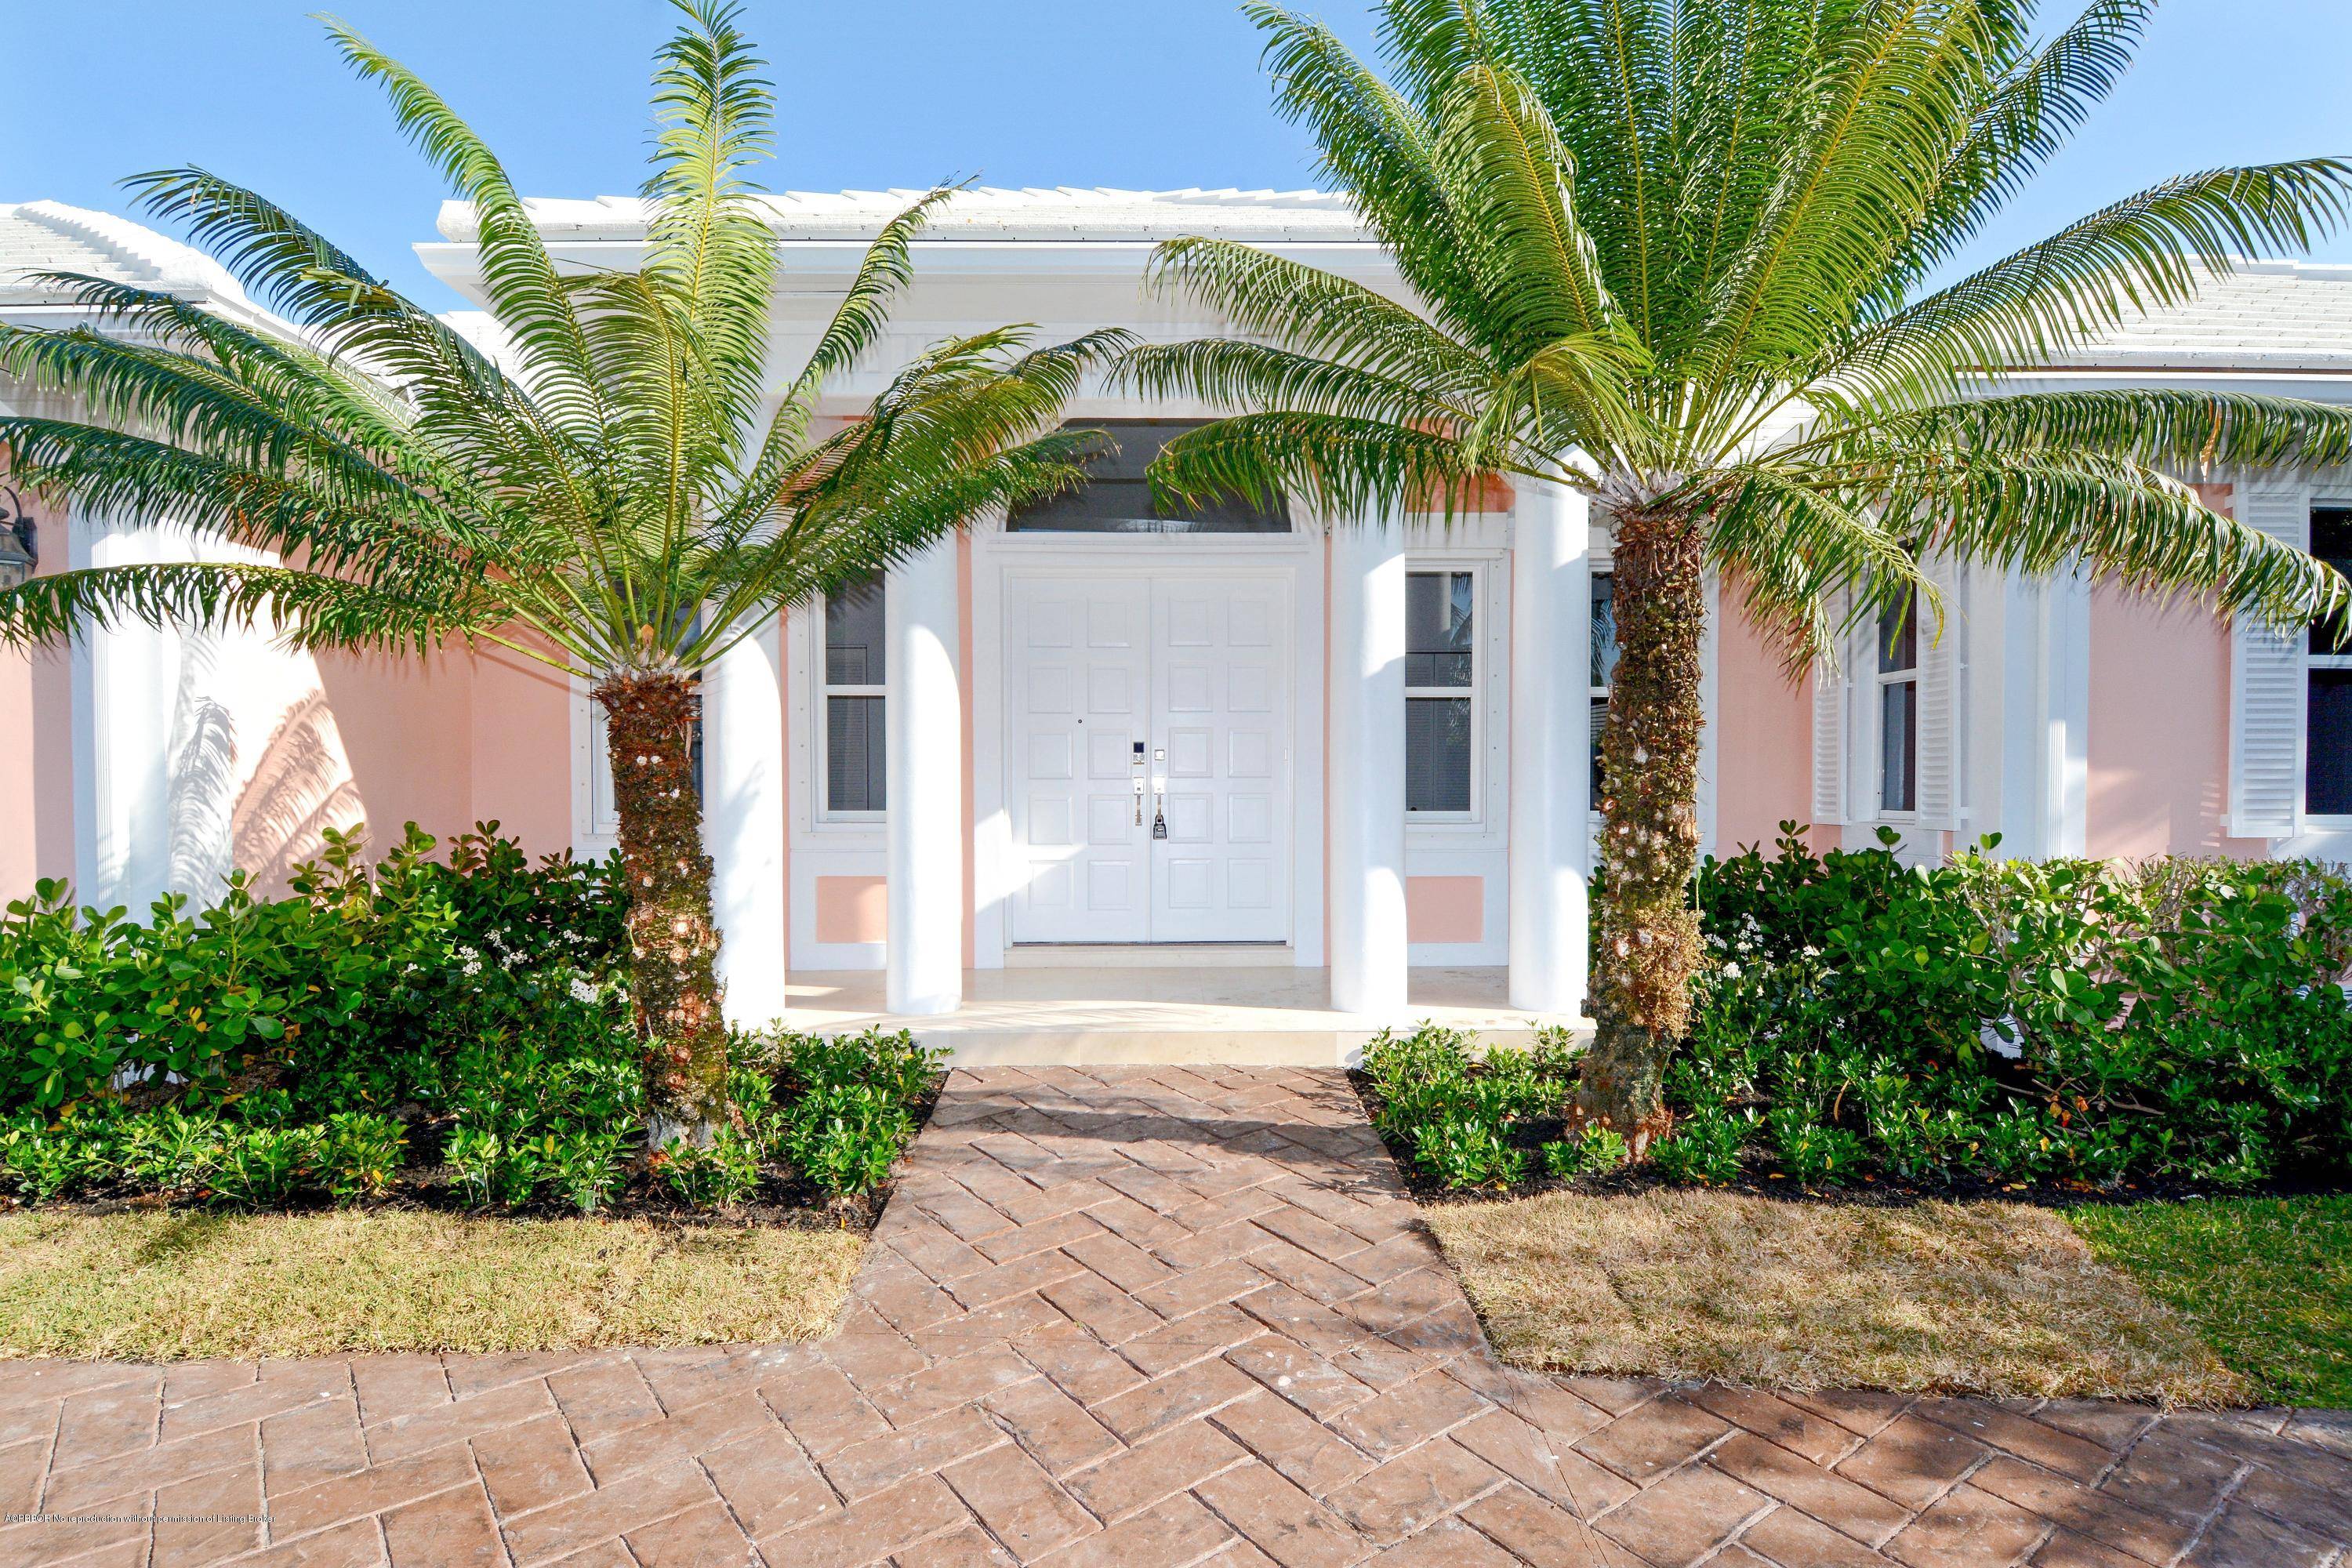 Beautiful 4BR 4. 5 BA Bermuda style home in North End featuring gourmet chef's kitchen and climate controlled wine room, outdoor fireplace, beach access, with electronic hurricane shutters, generator and ...